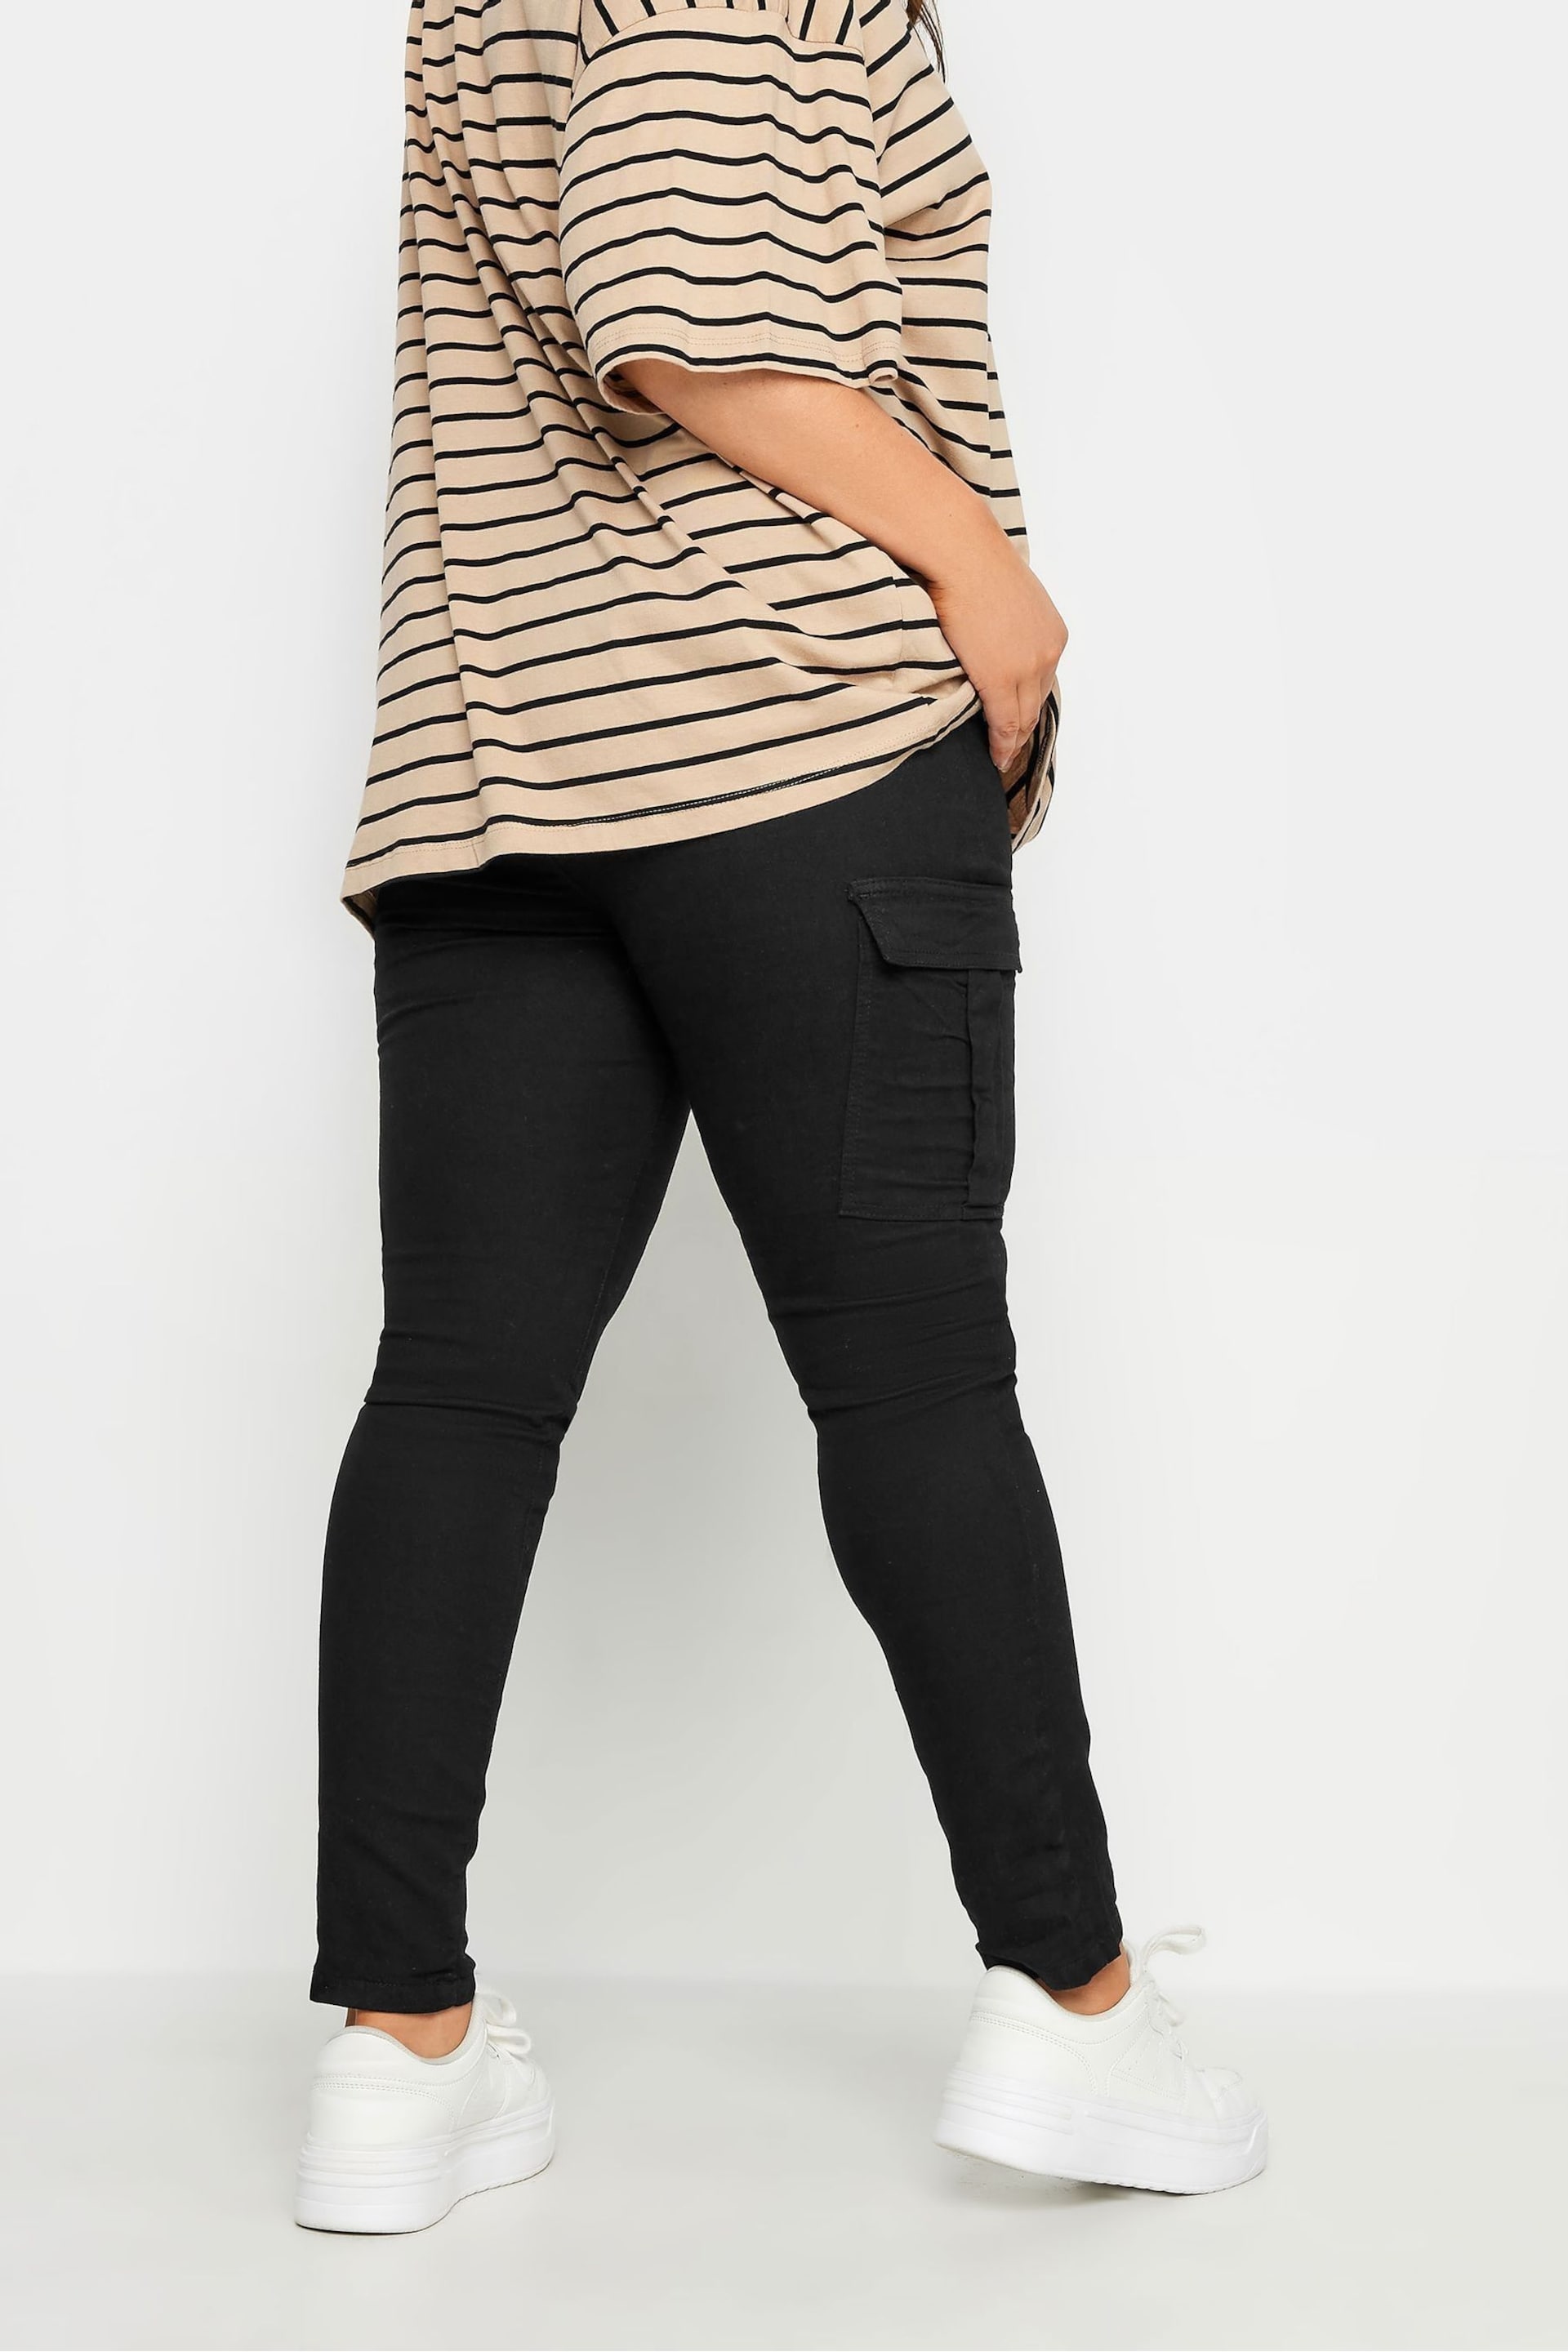 Yours Curve Black Cargo Grace Jeggings - Image 3 of 4